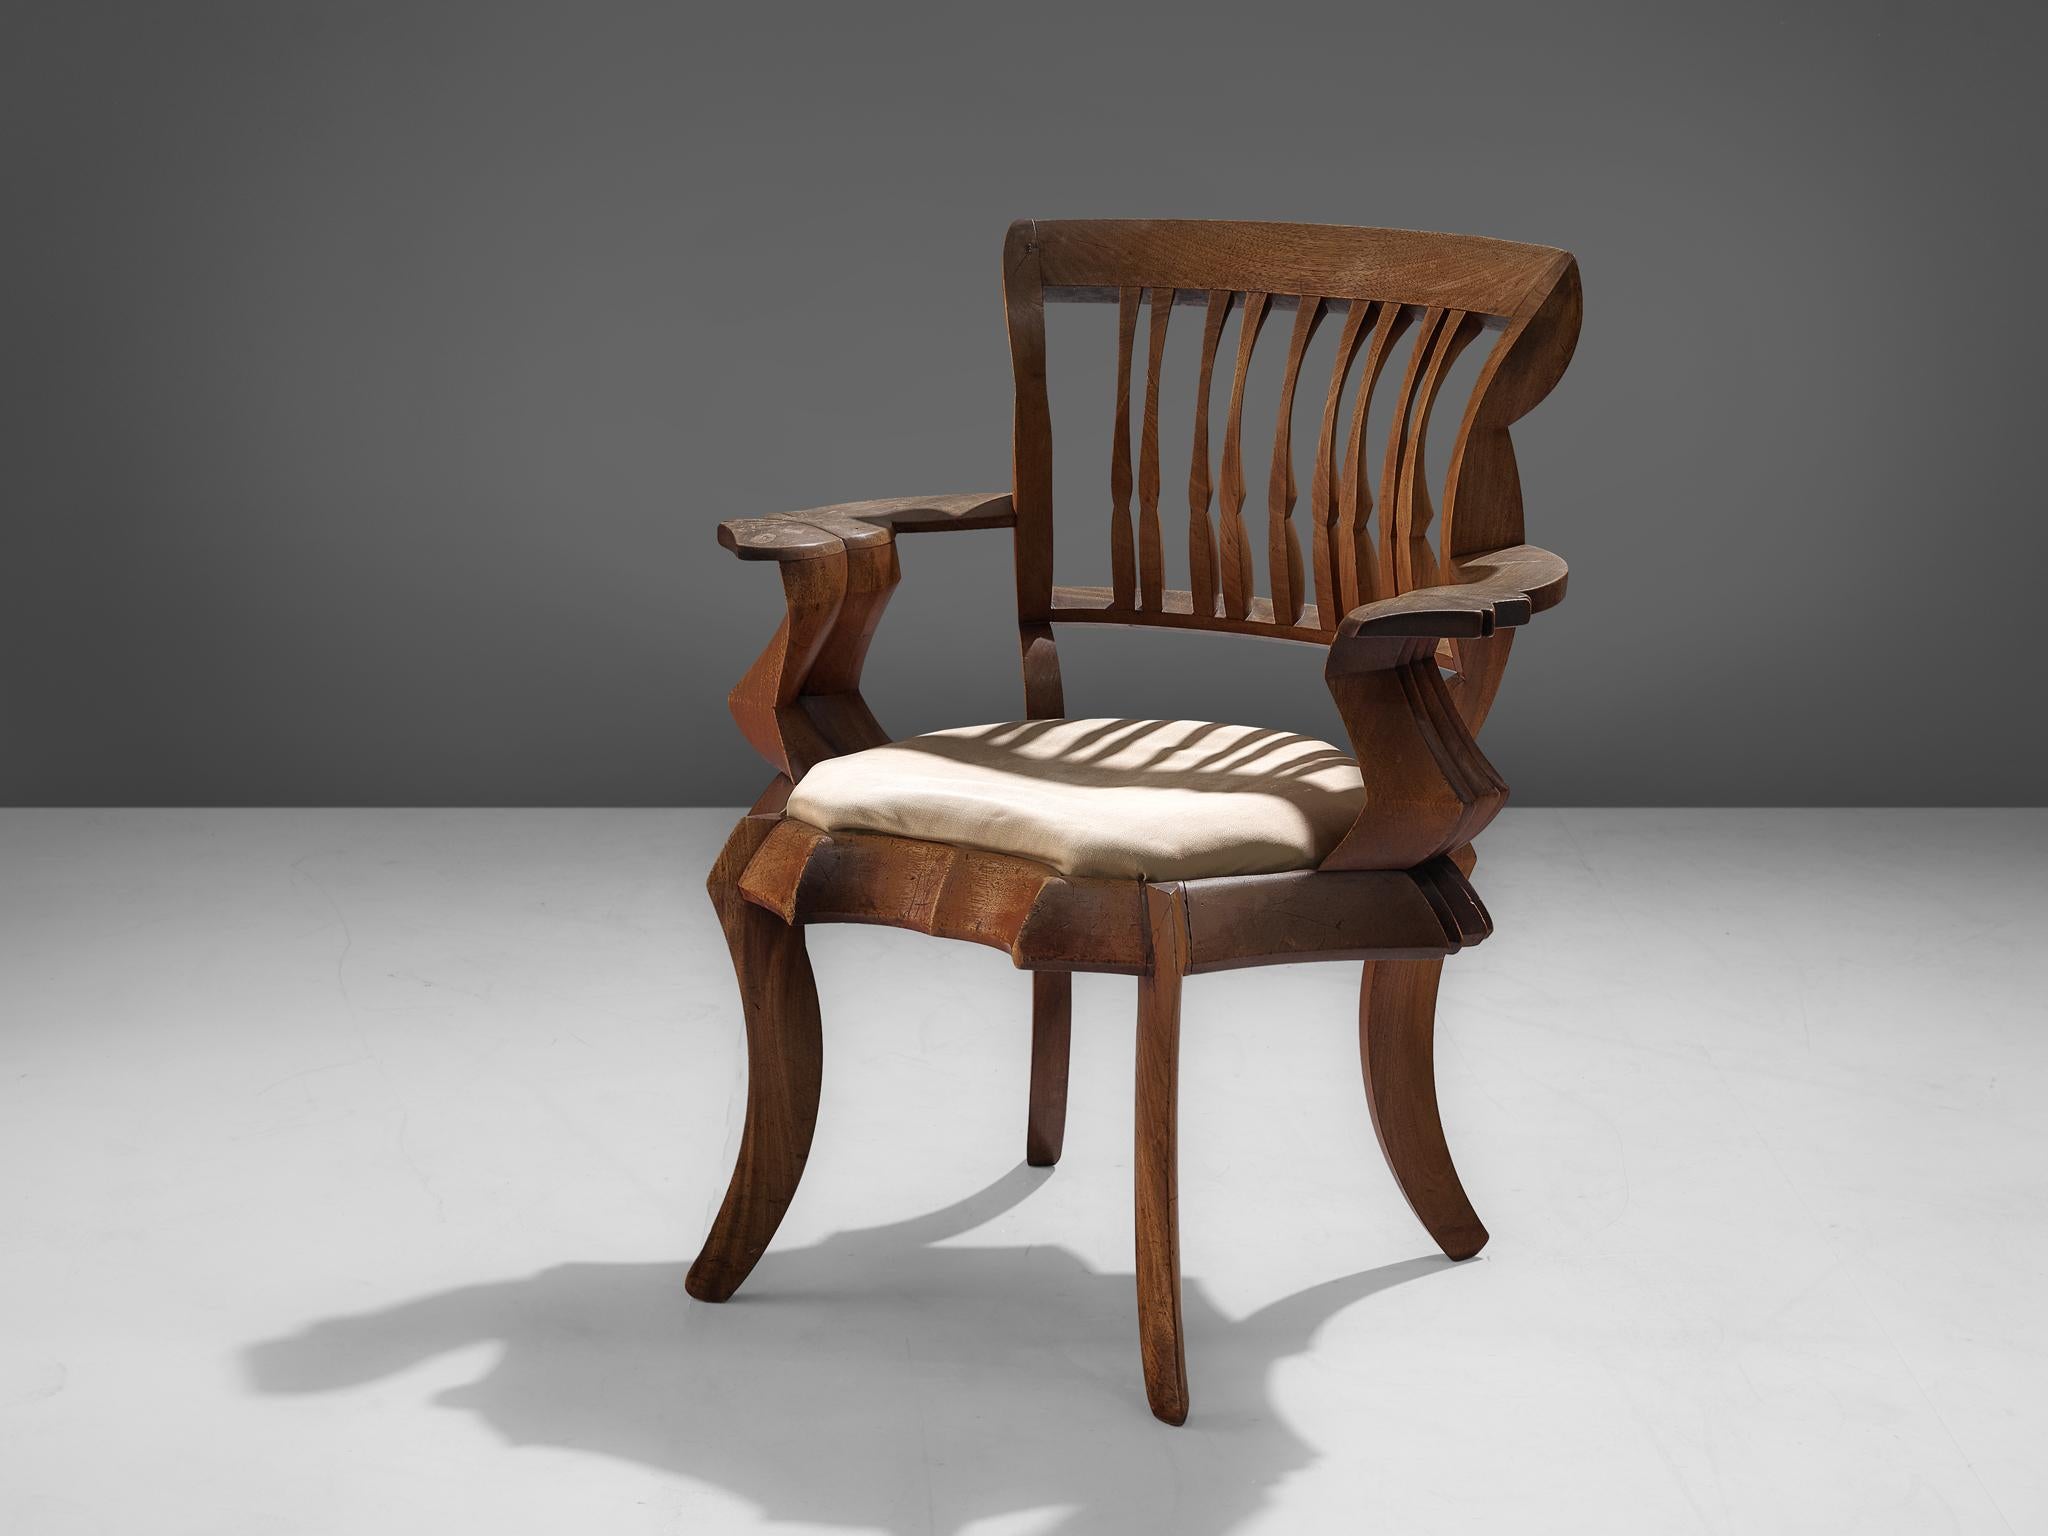 Armchair, solid mahogany, fabric, The Netherlands, 1927

This one-off chair was designed by a student of the Instituut voor Kunstnijverheidsonderwijs in 1927. It was chosen to be featured in a publication called Nederlandse Ambachts- en